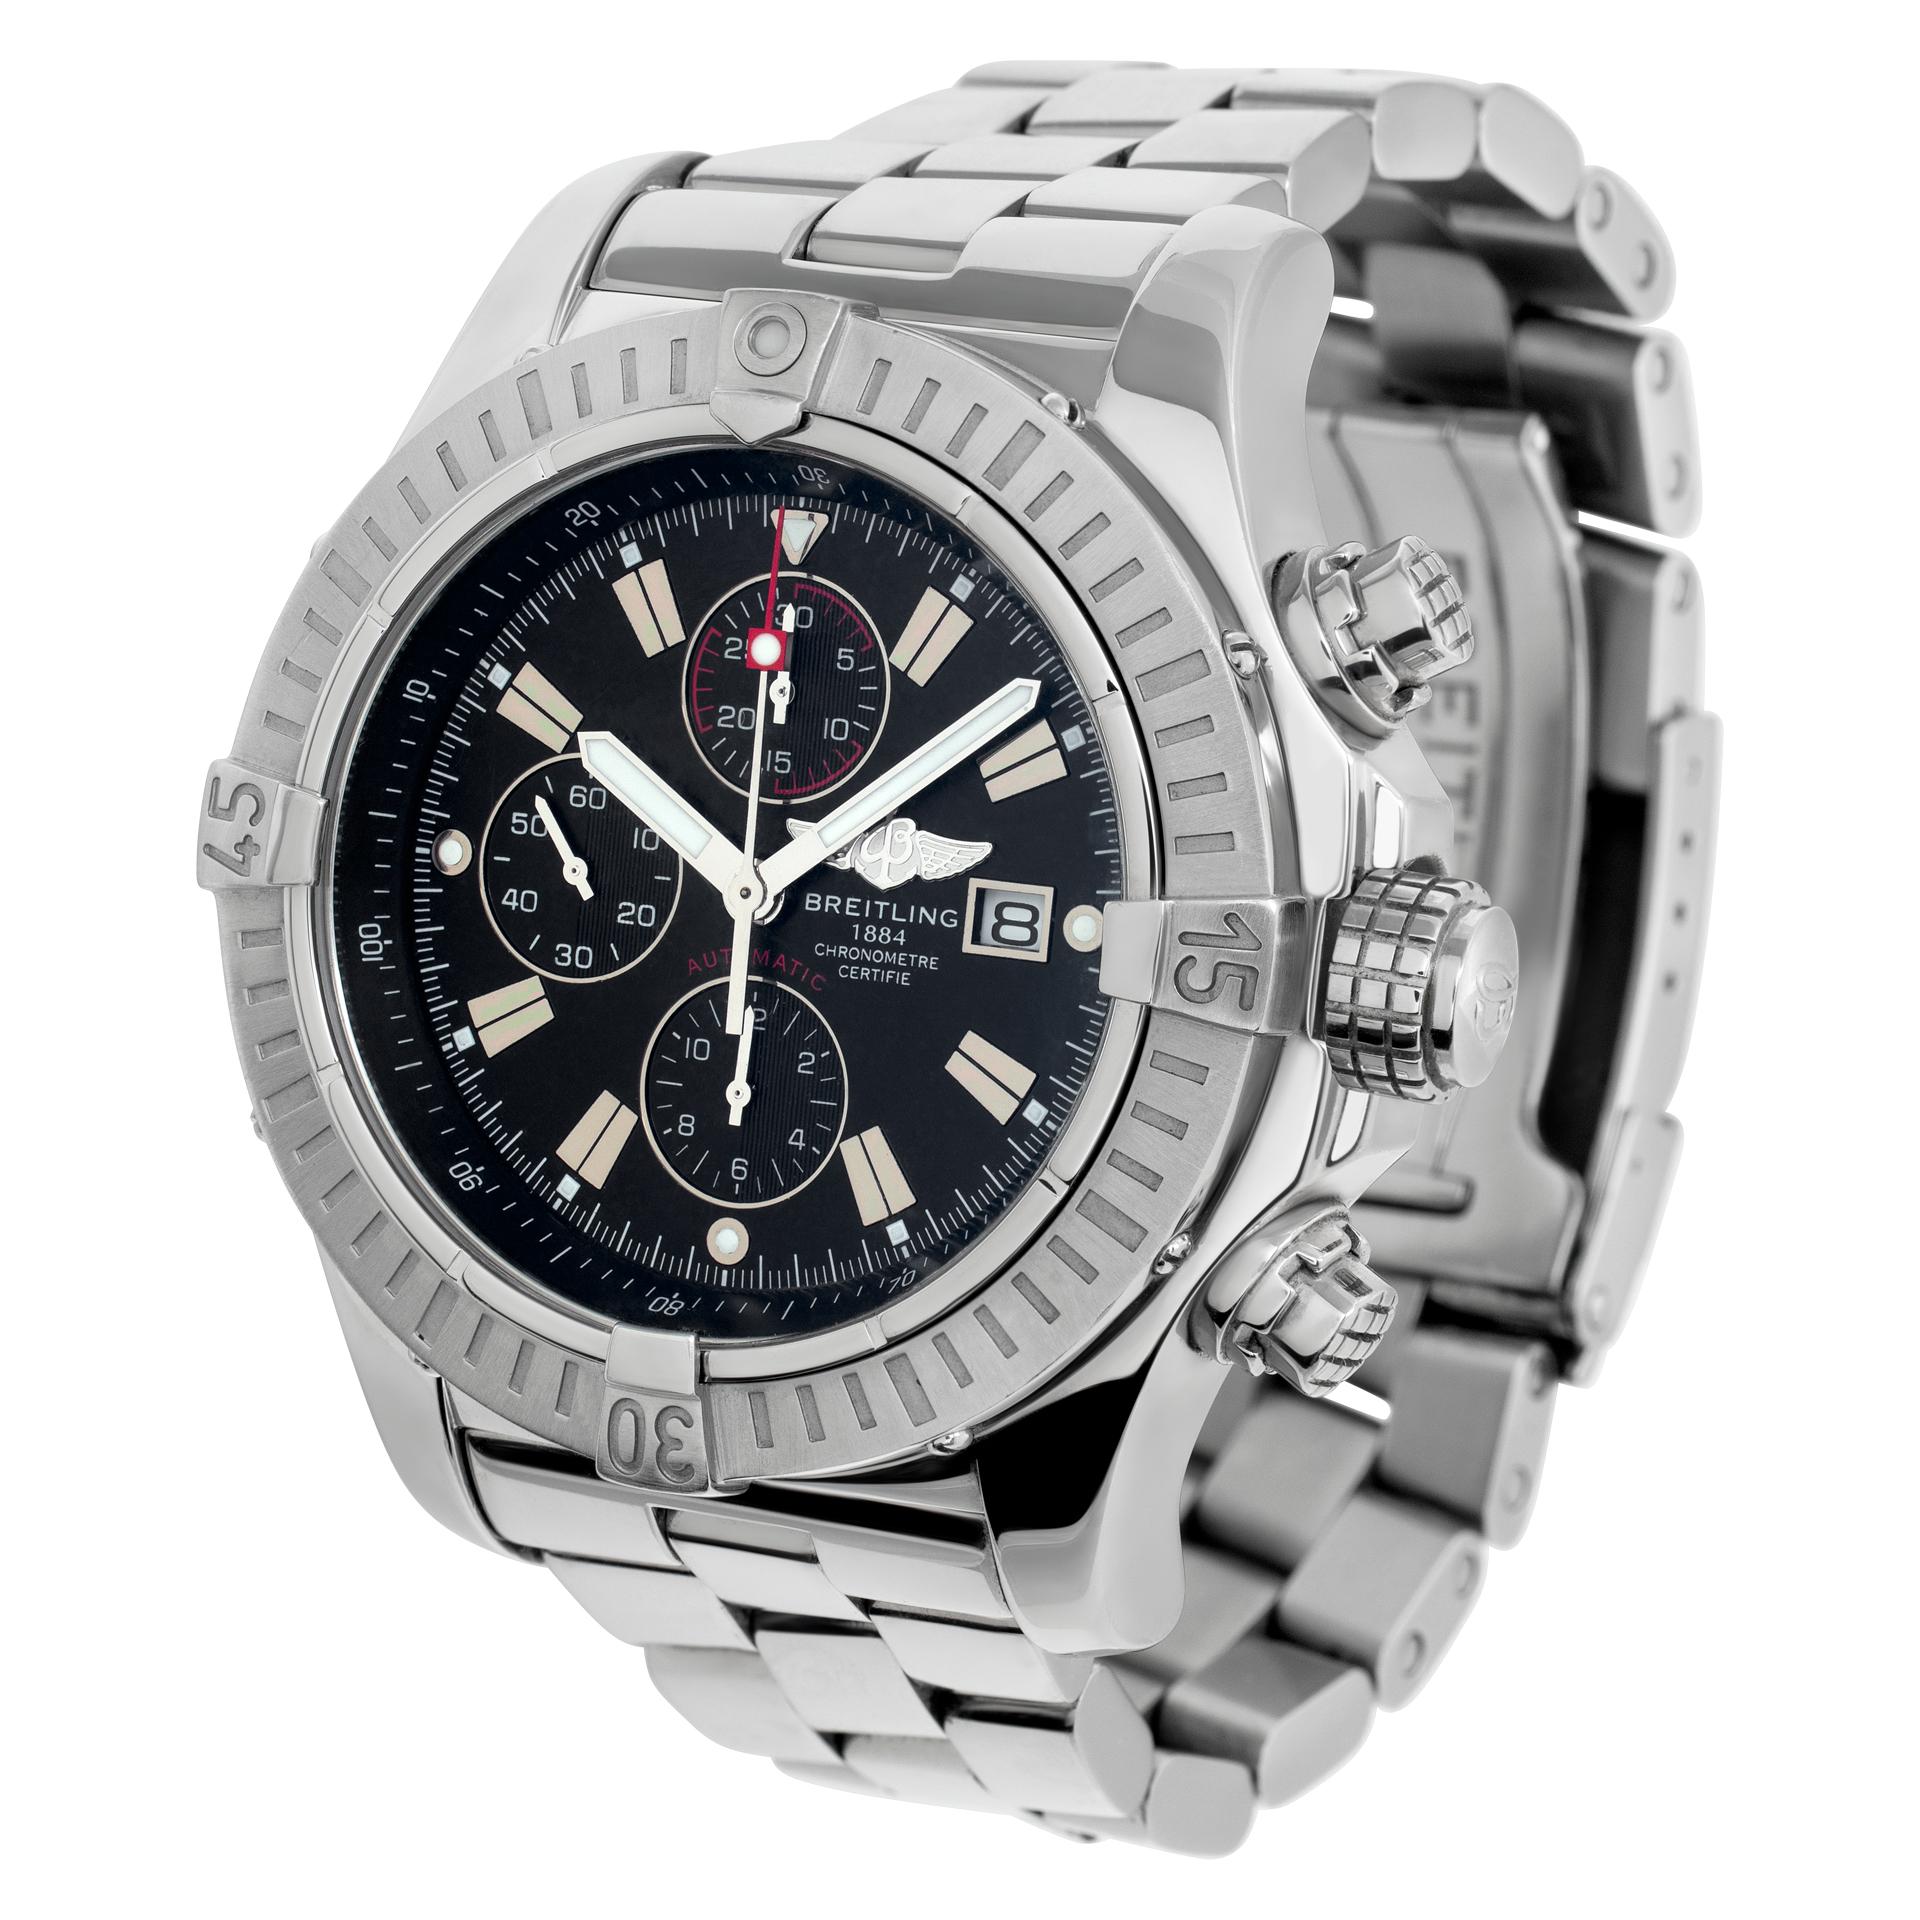 Breitling Super Avenger in stainless steel. Auto w/ subseconds, date and chronograph. 47 mm case size. Ref A13370. Circa 2010s. Fine Pre-owned Breitling Watch.

 Certified preowned Sport Breitling Super Avenger A13370 watch is made out of Stainless